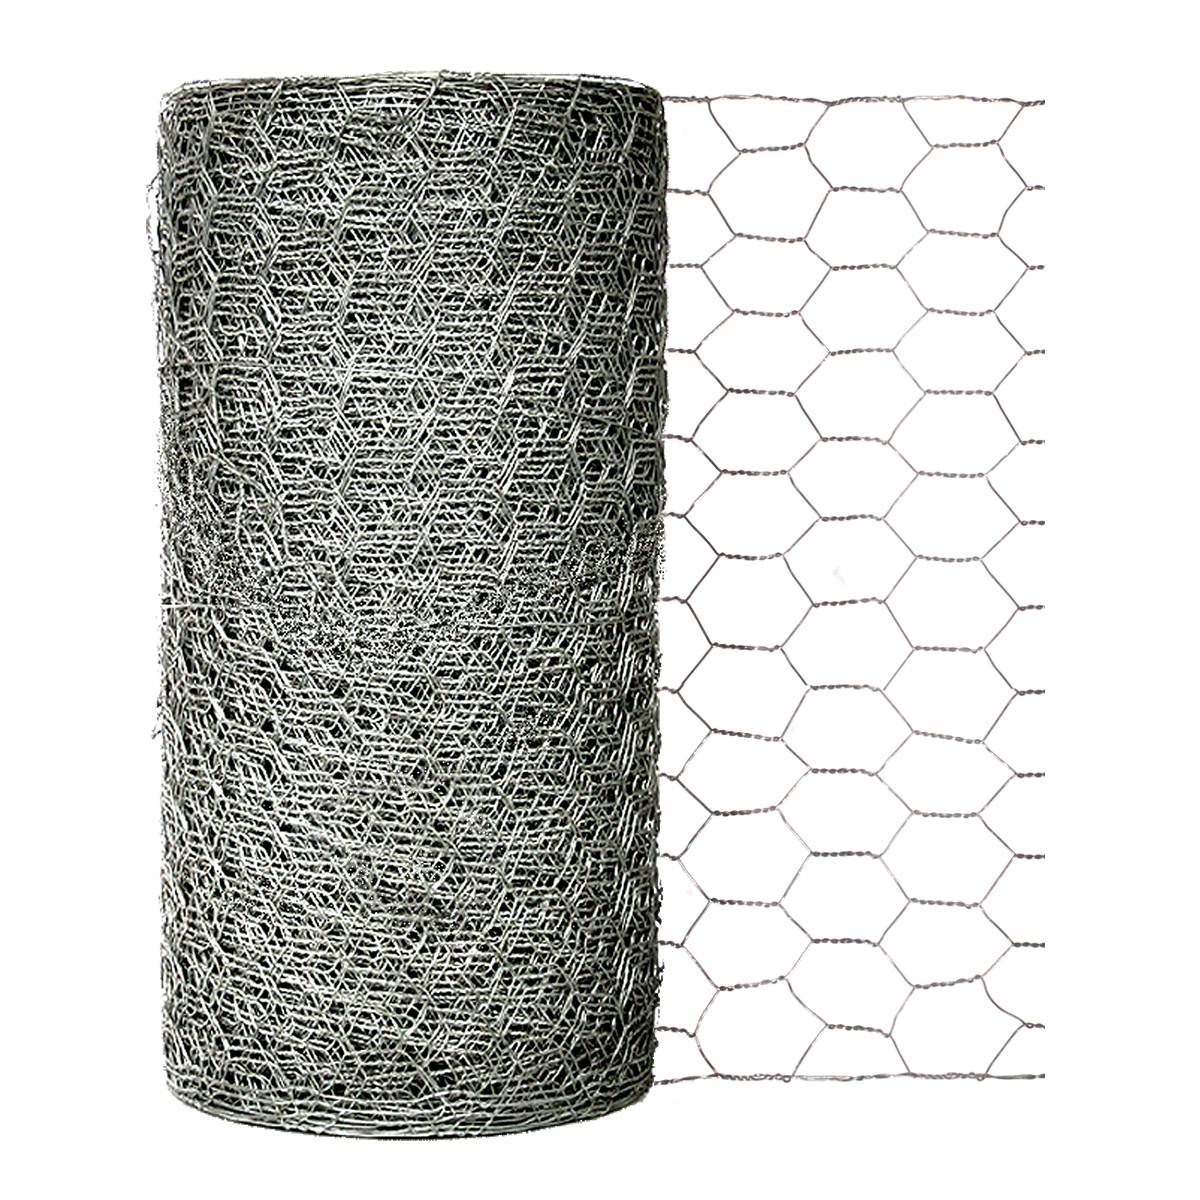 OEM/ODM Manufacturer Chain Link Fence Construction - Chicken Wire Hexagonal Wire Netting Woven with Galvanized Steel Wire  – Tian Yilong